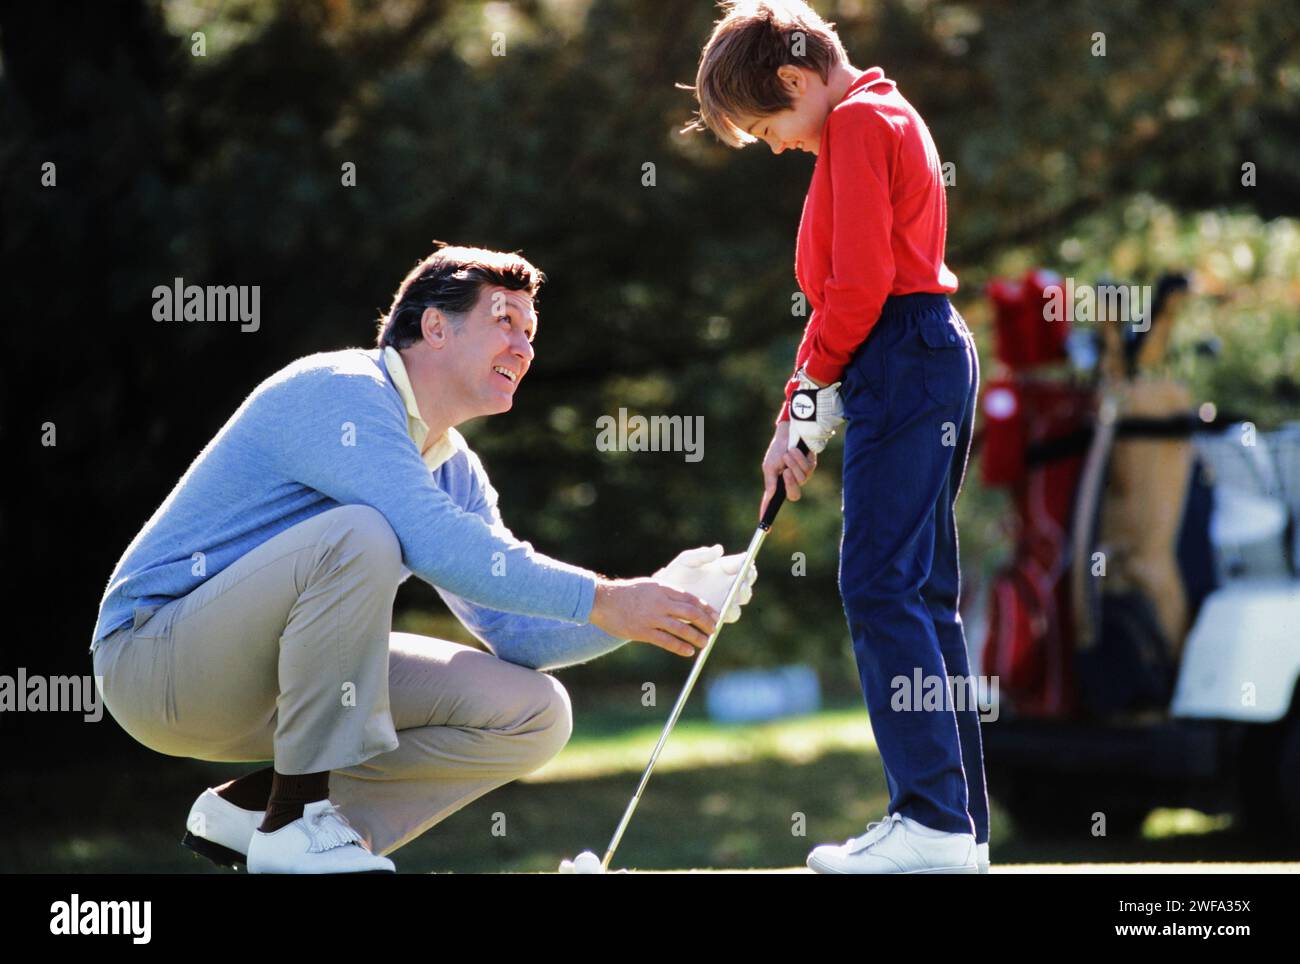 A father teaching his son no about the game of golf on a lush green course on a bright and sunny day. Stock Photo